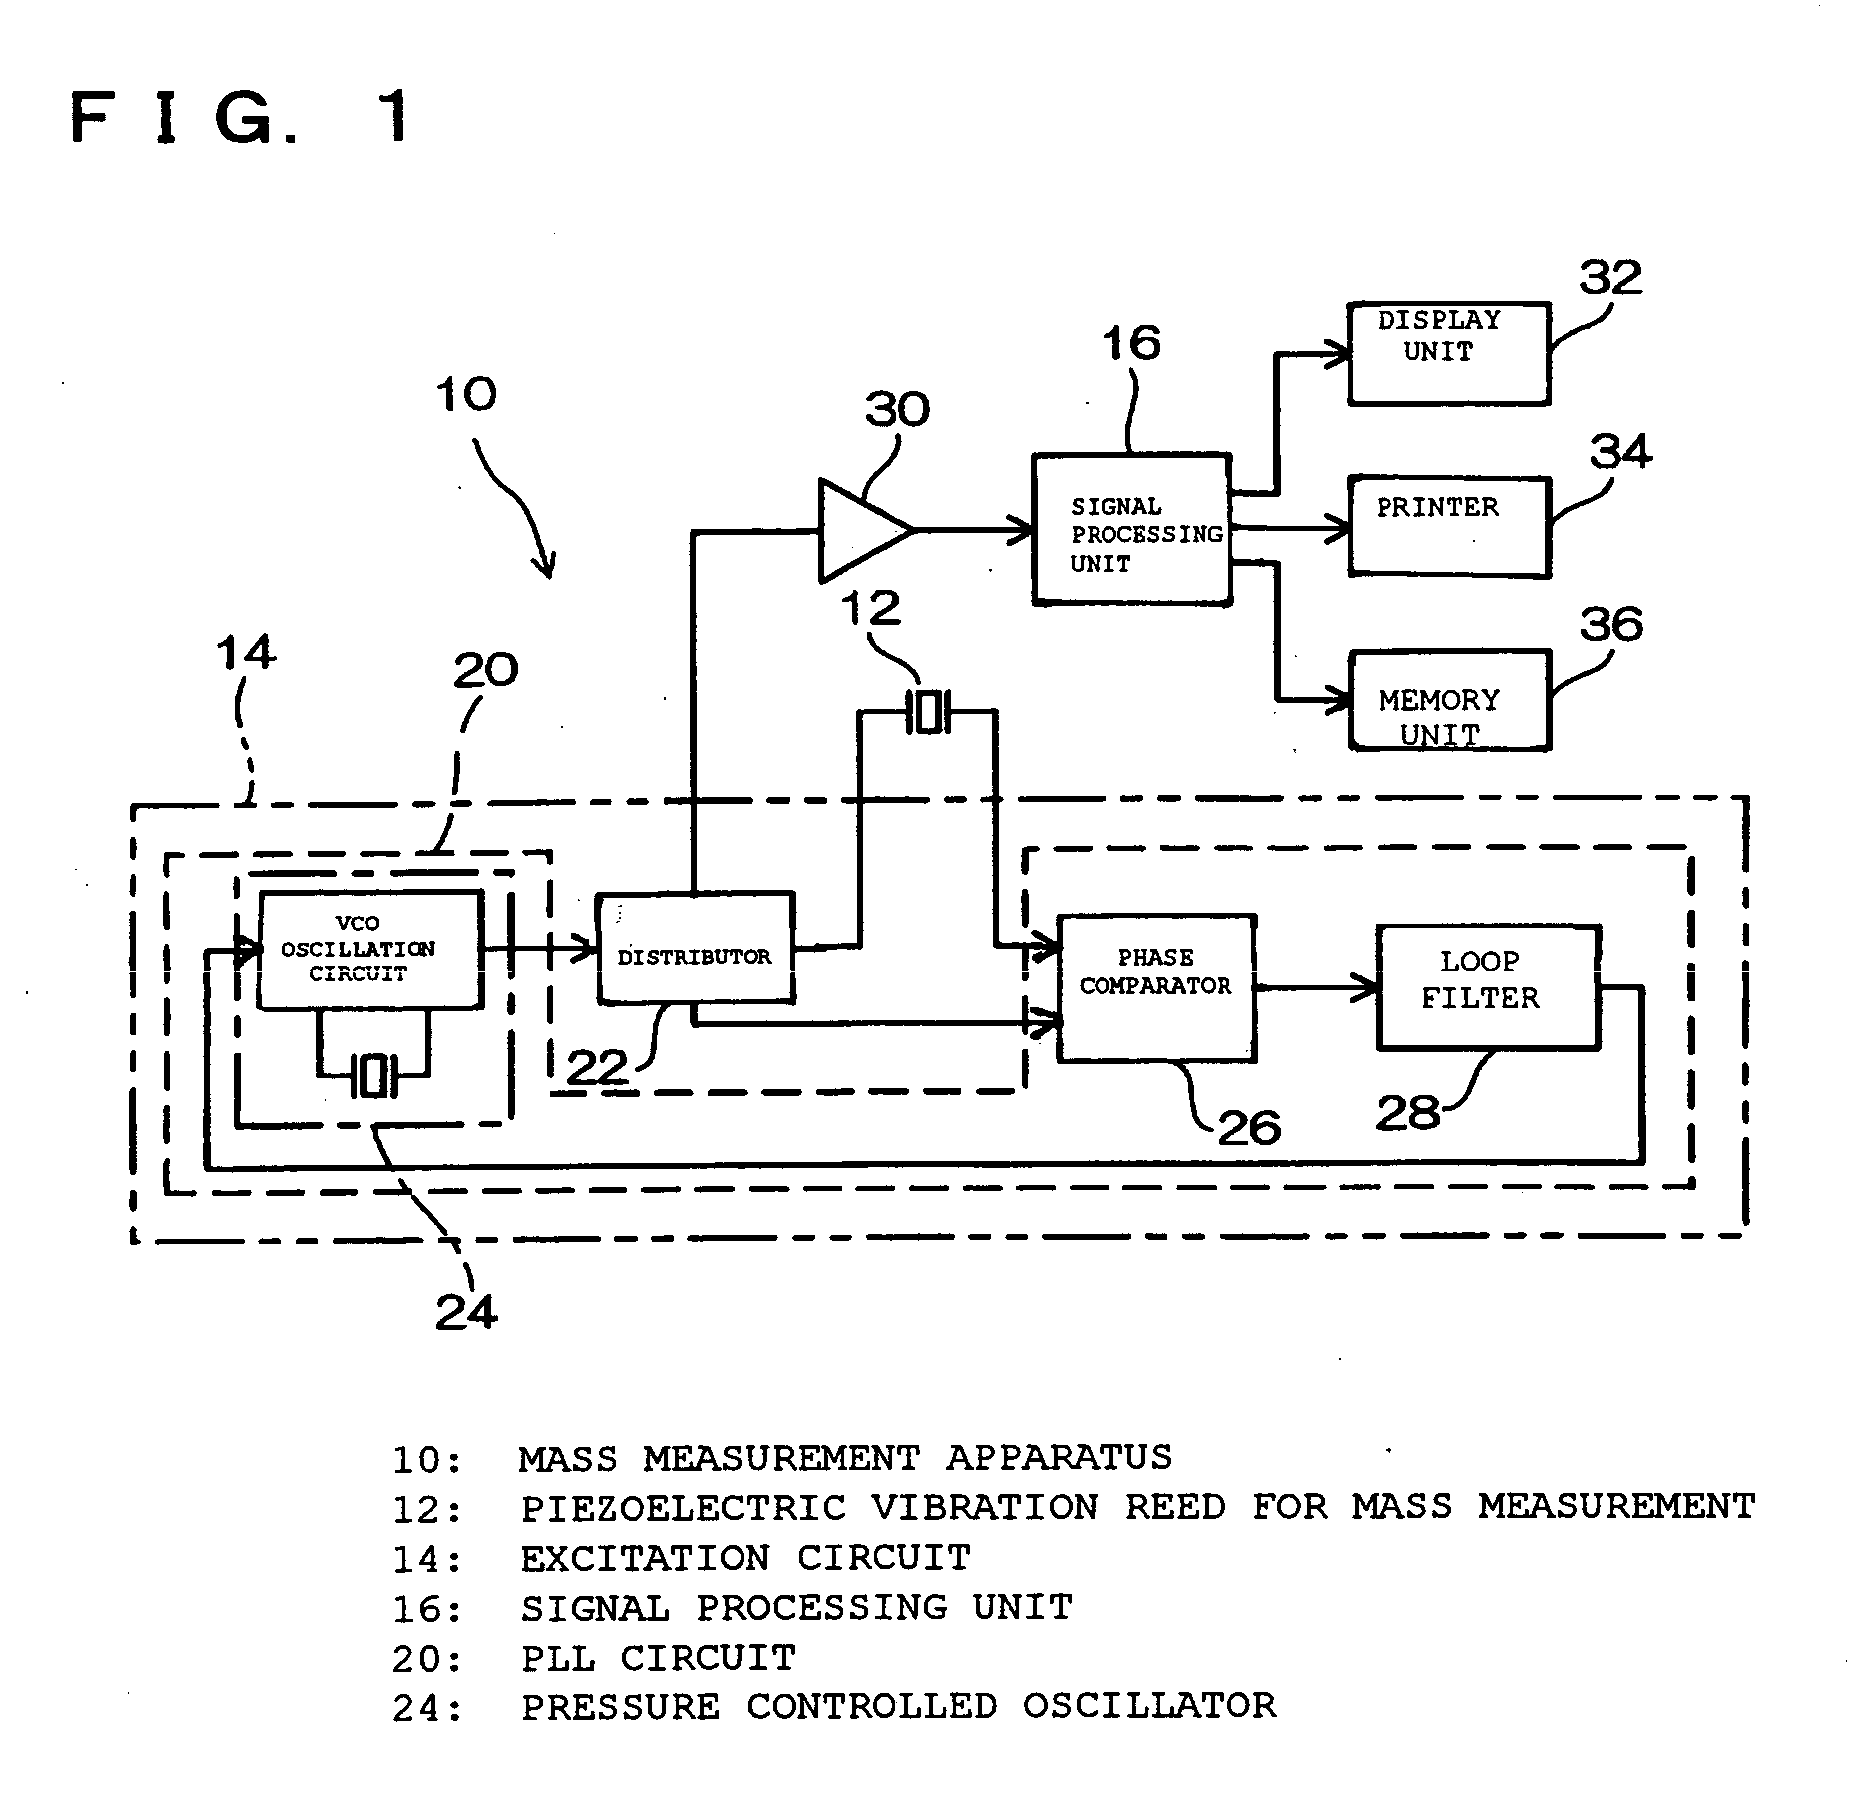 Mass measurement method, circuit for exciting piezoelectric vibration reed for mass measurement, and mass measurement apparatus